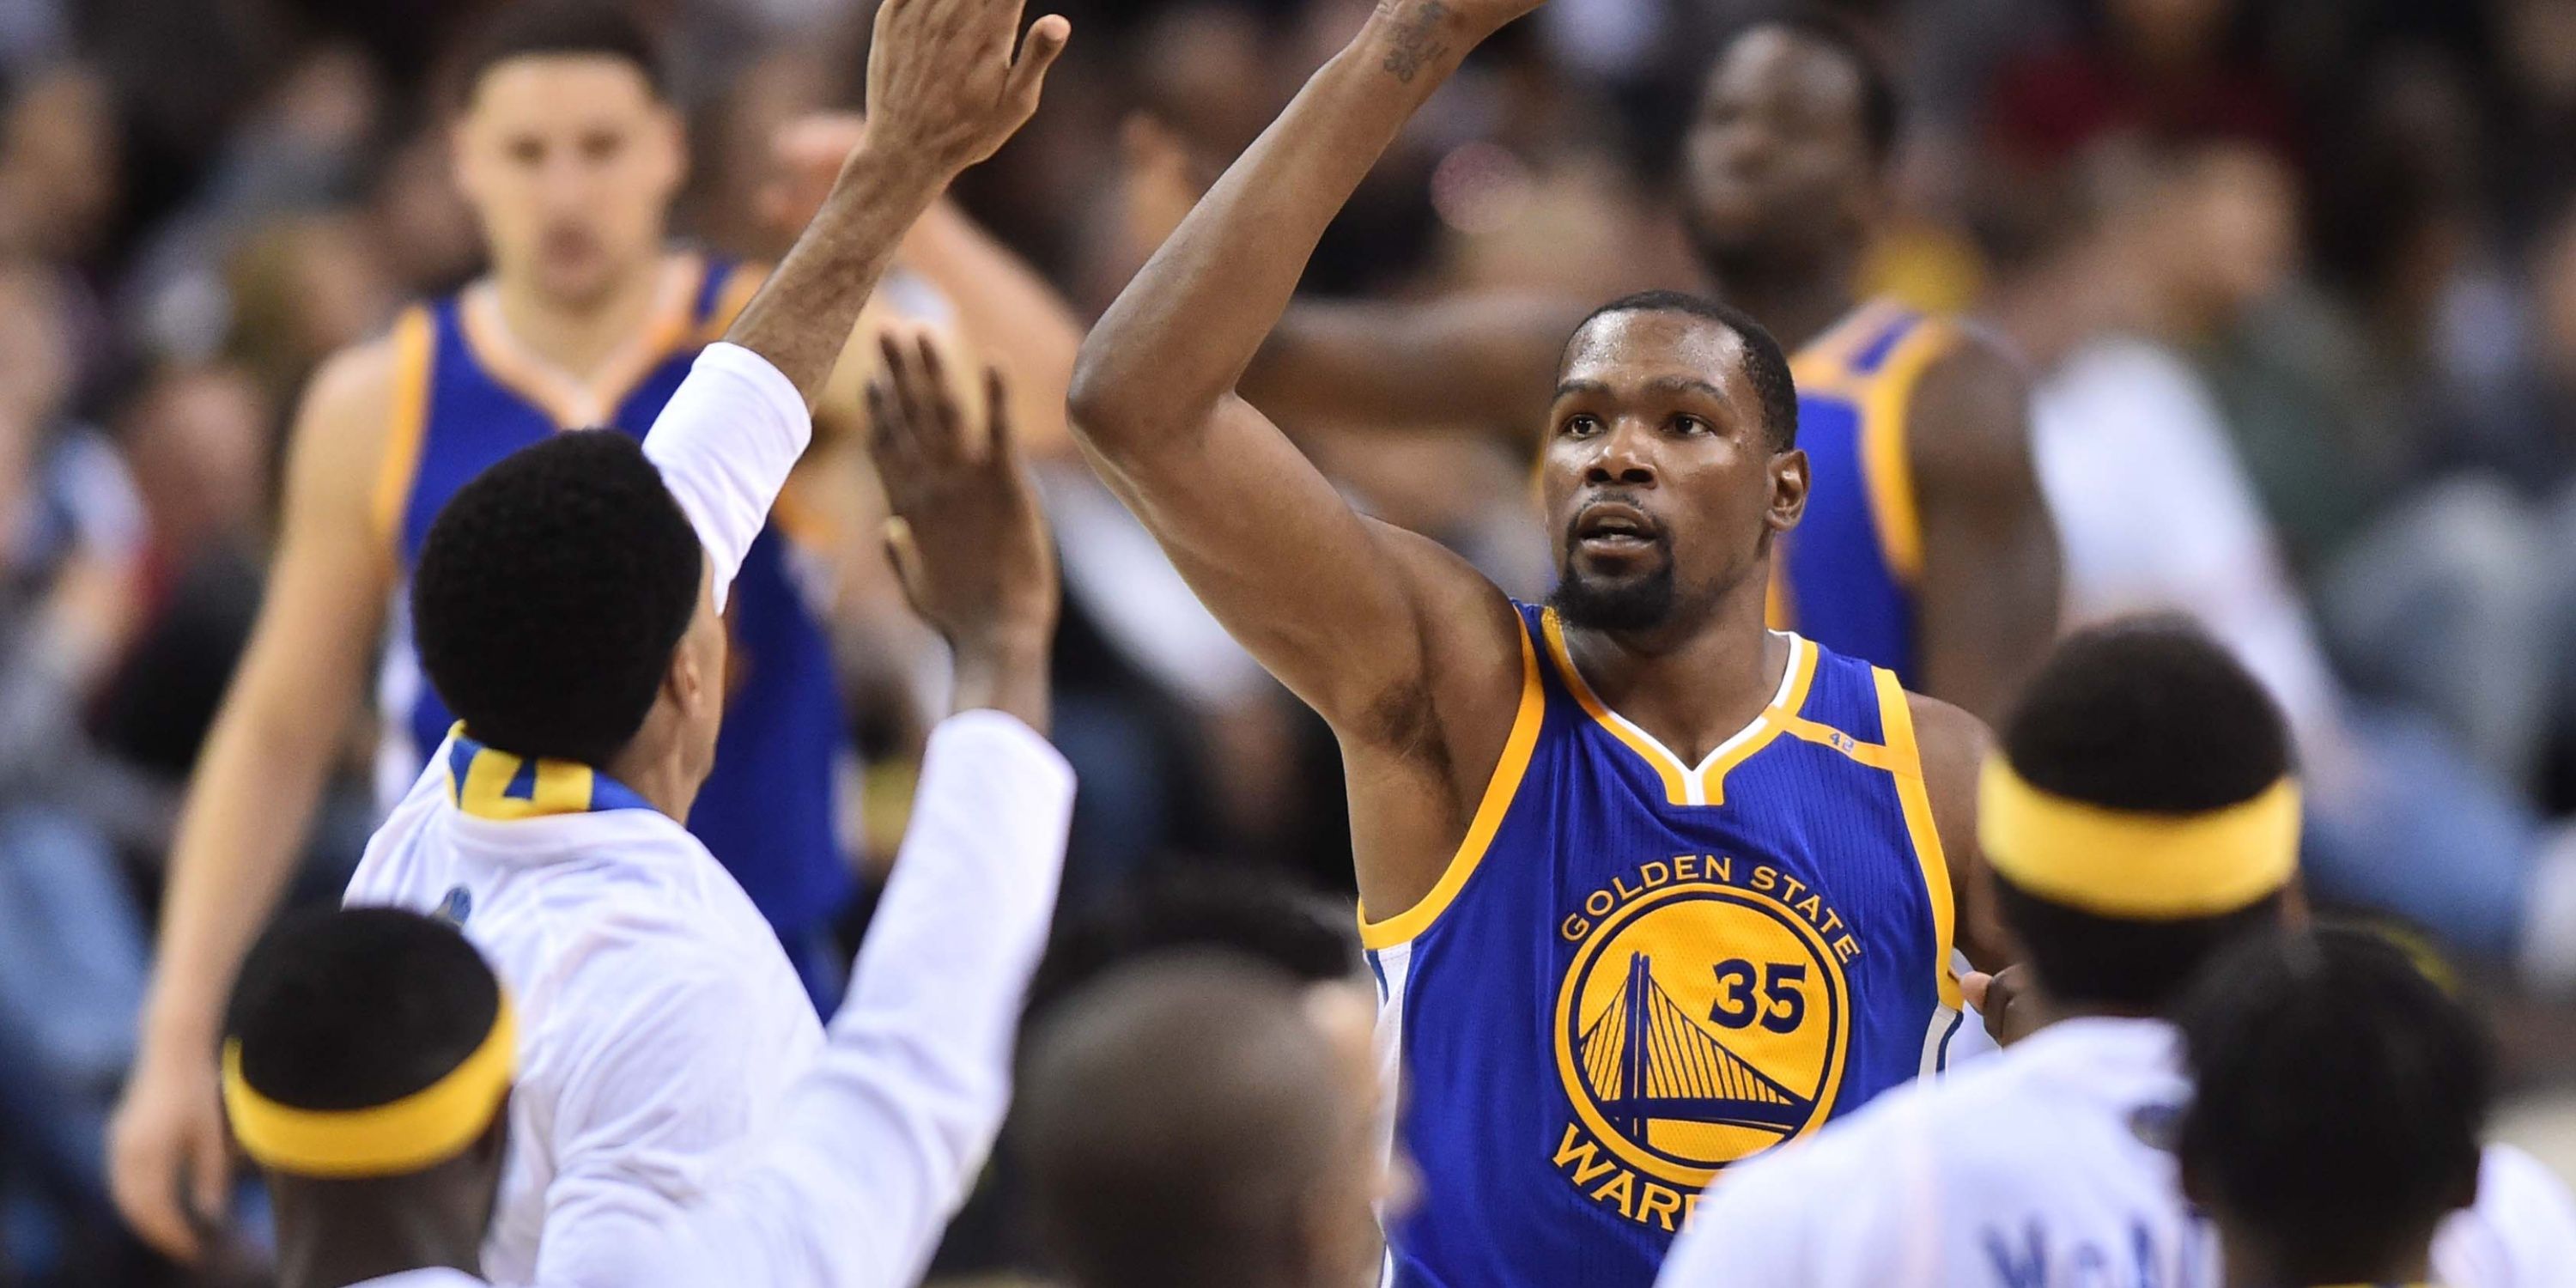 Golden State Warriors forward Kevin Durant celebrates during Game 3 of the 2017 NBA Finals.